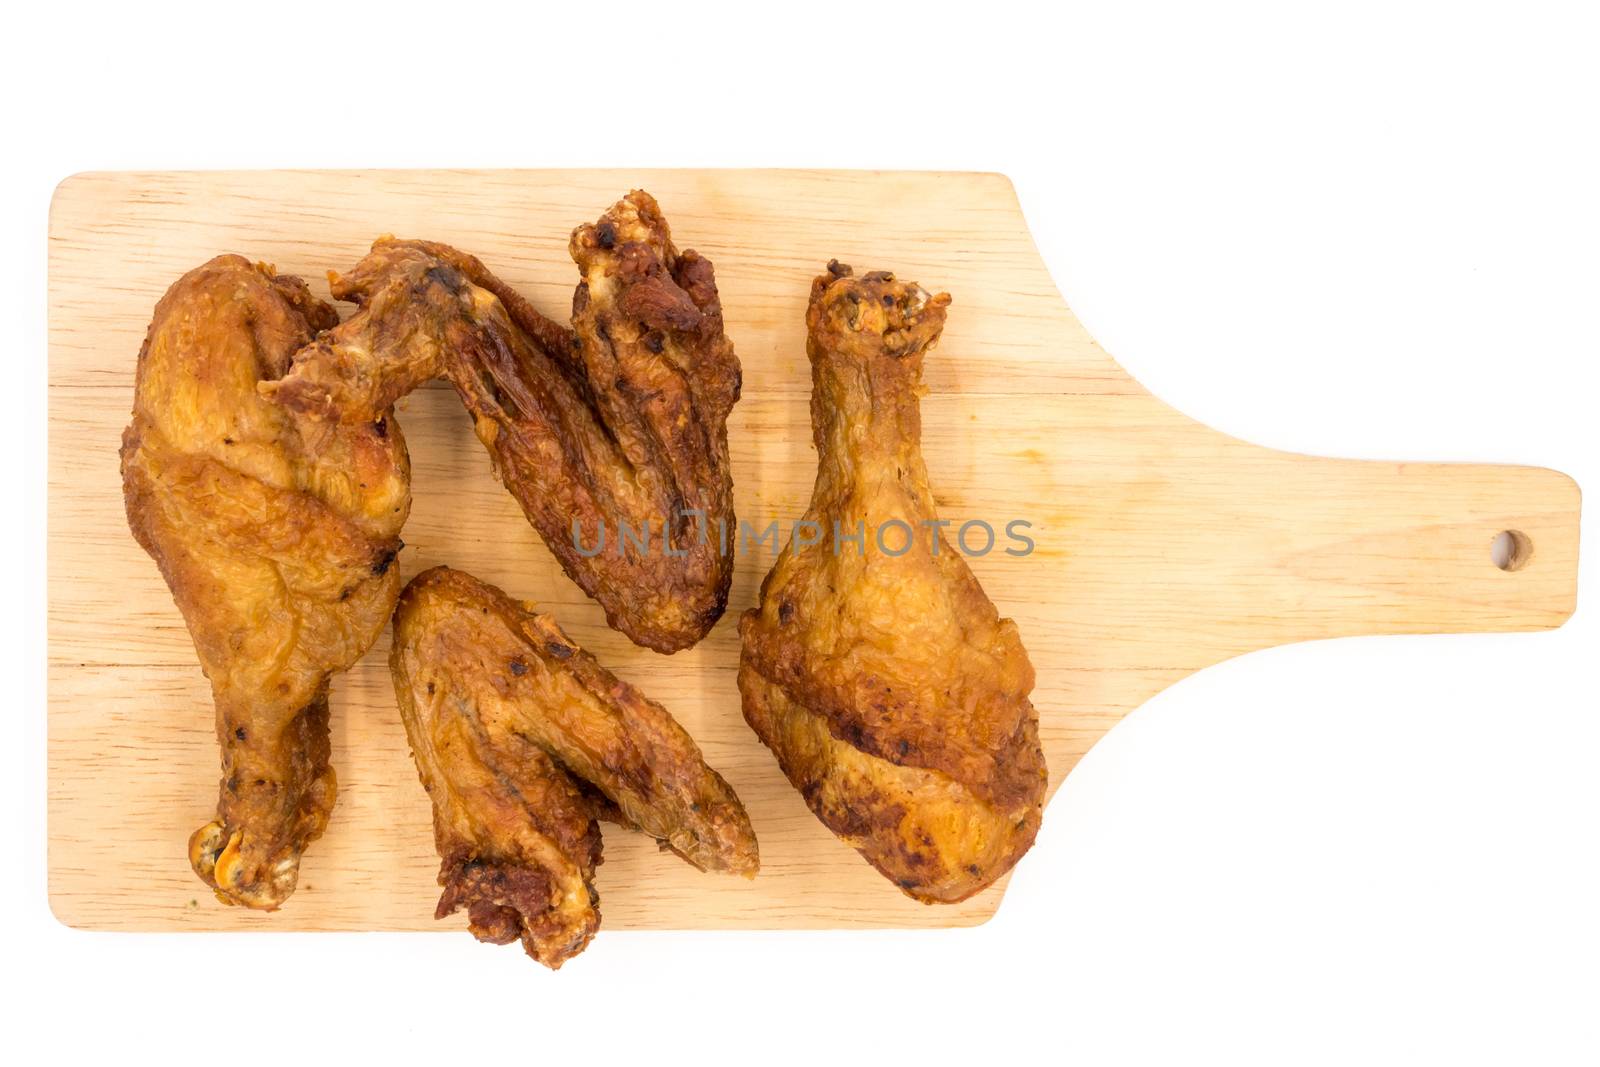 Fried chicken legs and wings on wooden tray over a white background.